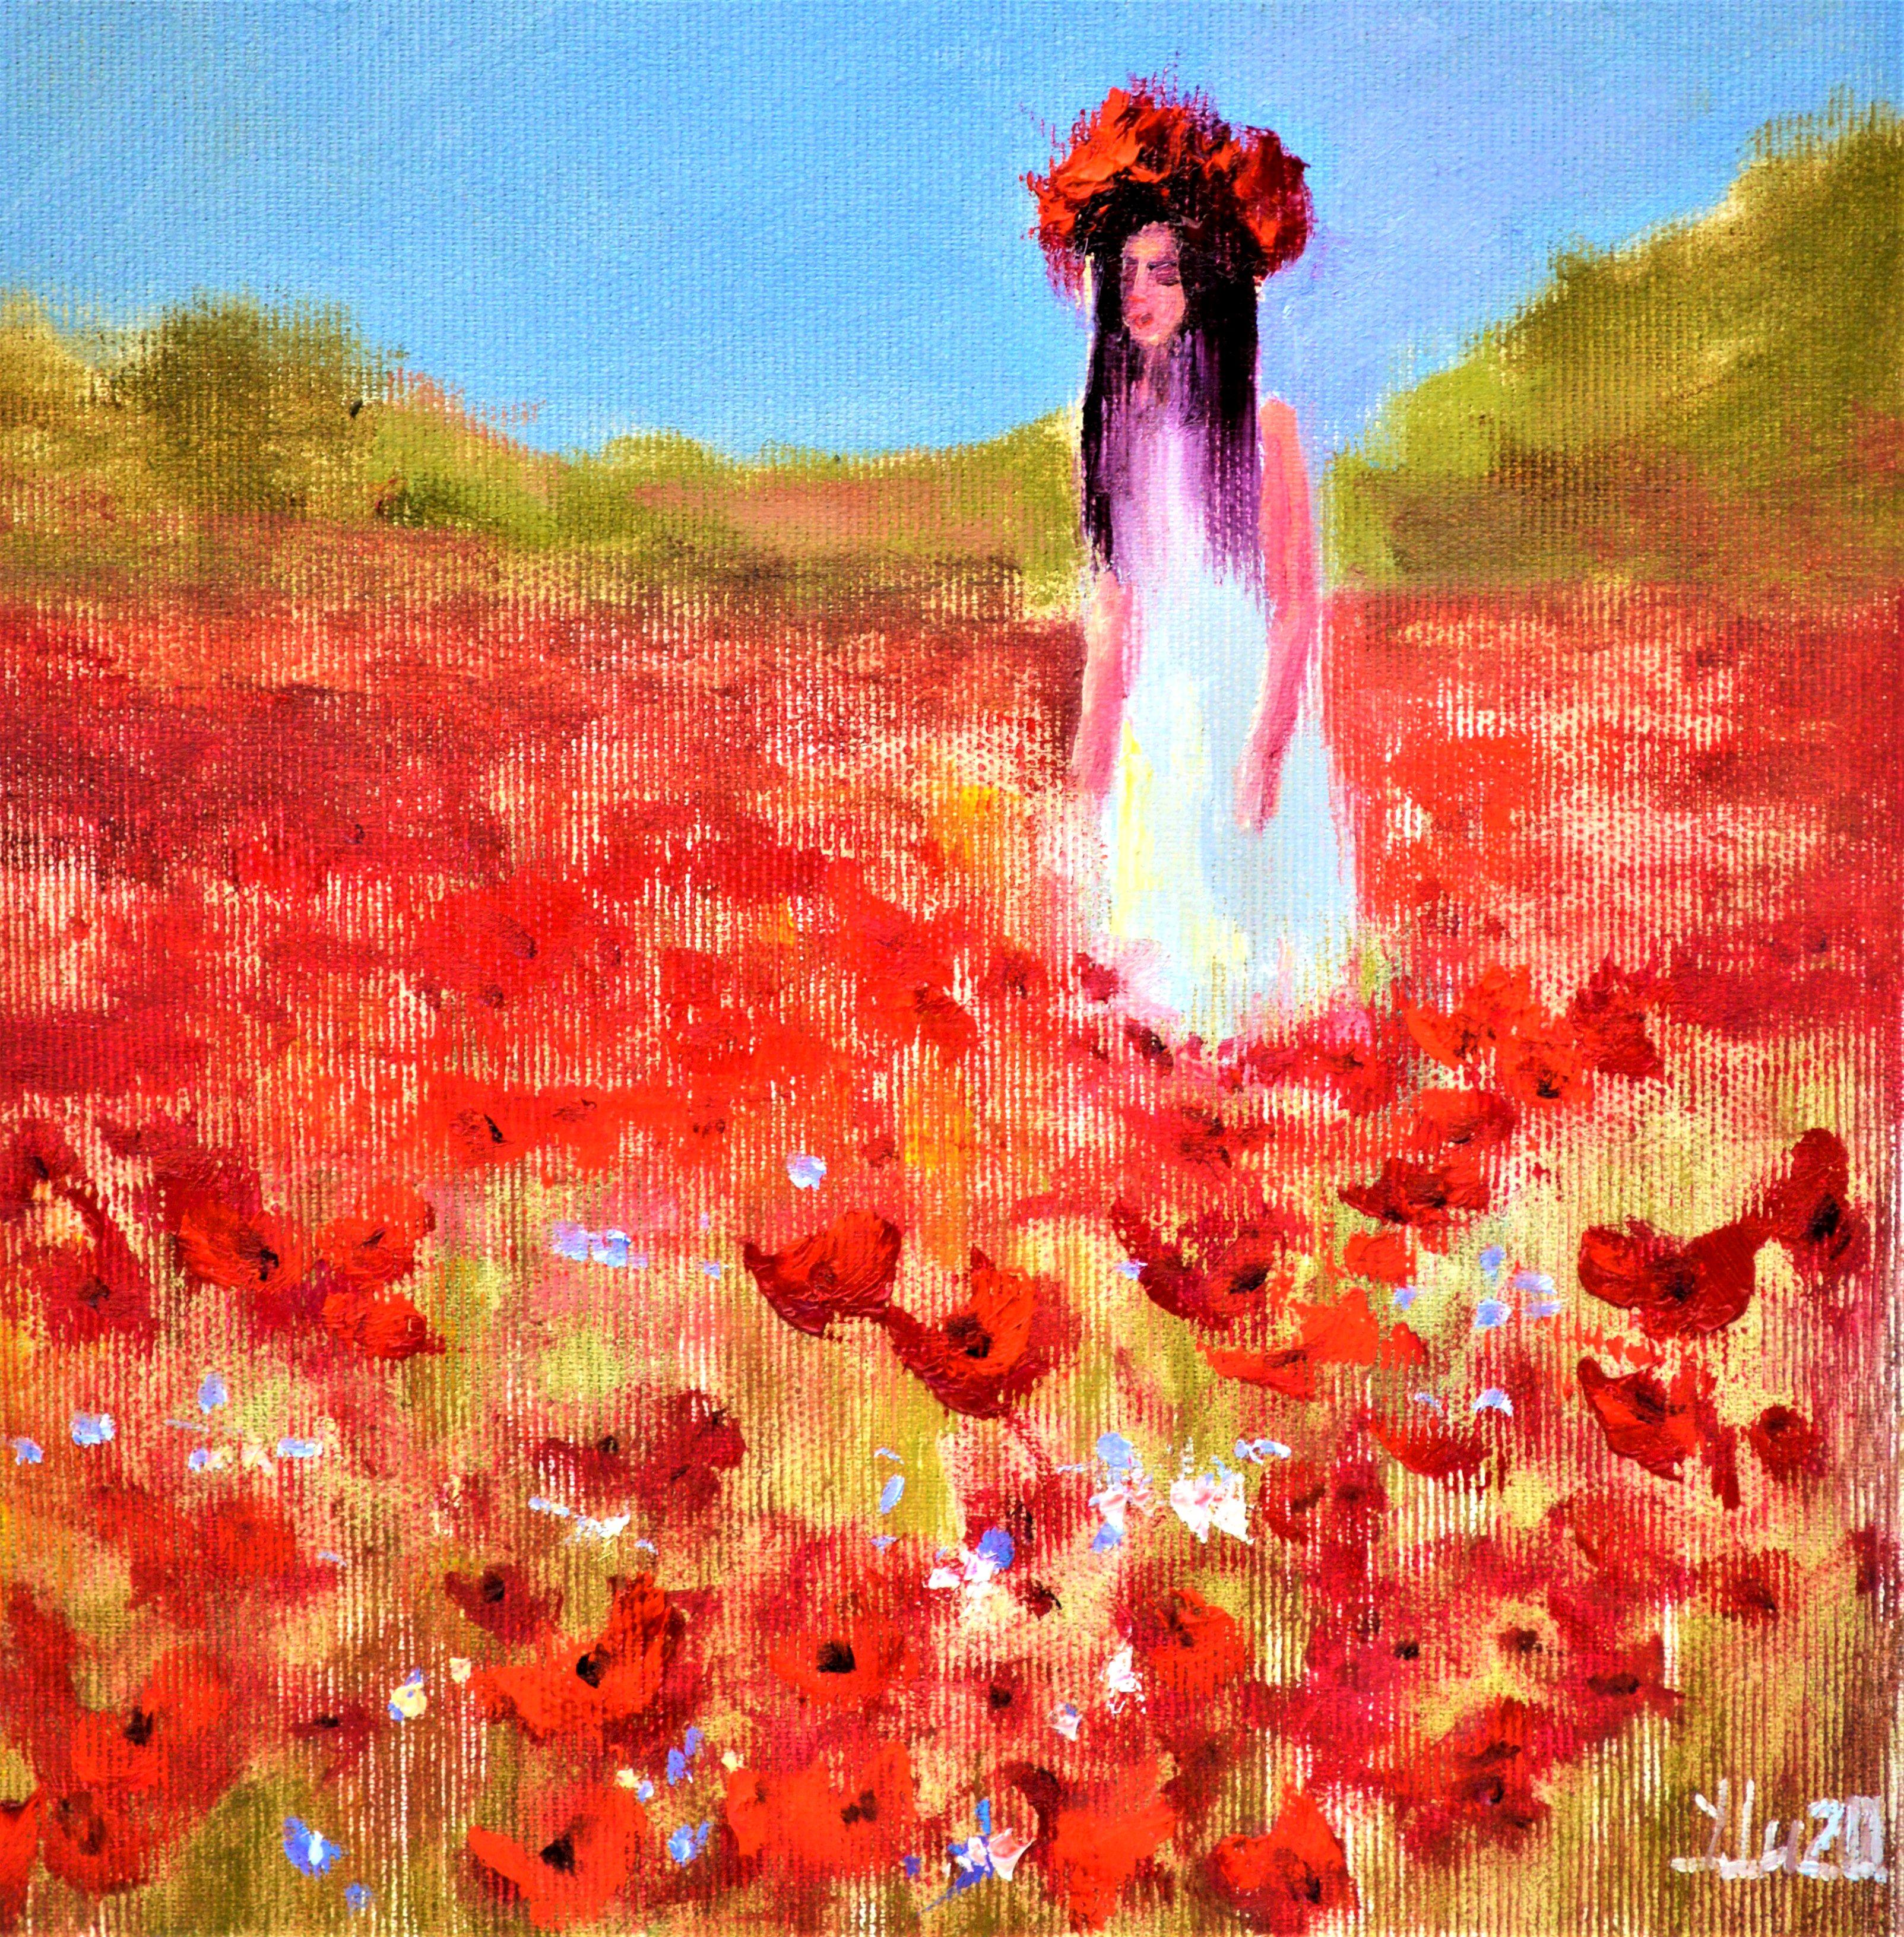 In this oil painting, I immersed myself in the essence of nature's whimsy, capturing a figure enveloped by a sea of poppies. Inspired by expressionism and impressionism, I used bold strokes and vivid hues to evoke a dreamlike state. The painting